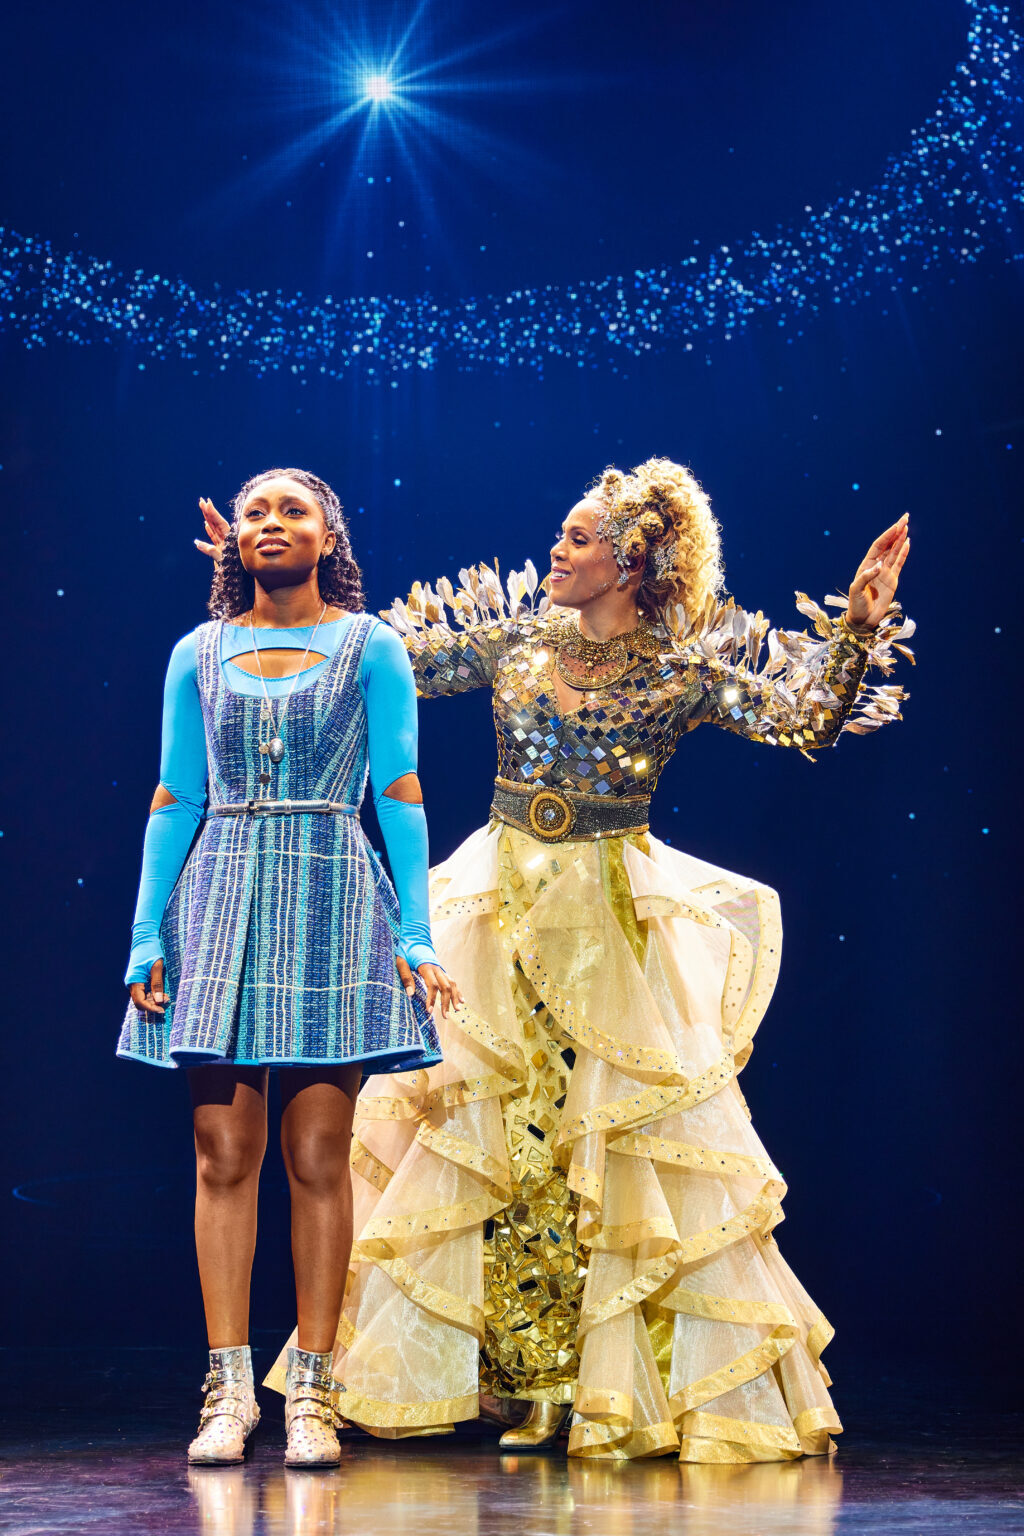 A scene from 'The Wiz' where Glinda sings to Dorothy.